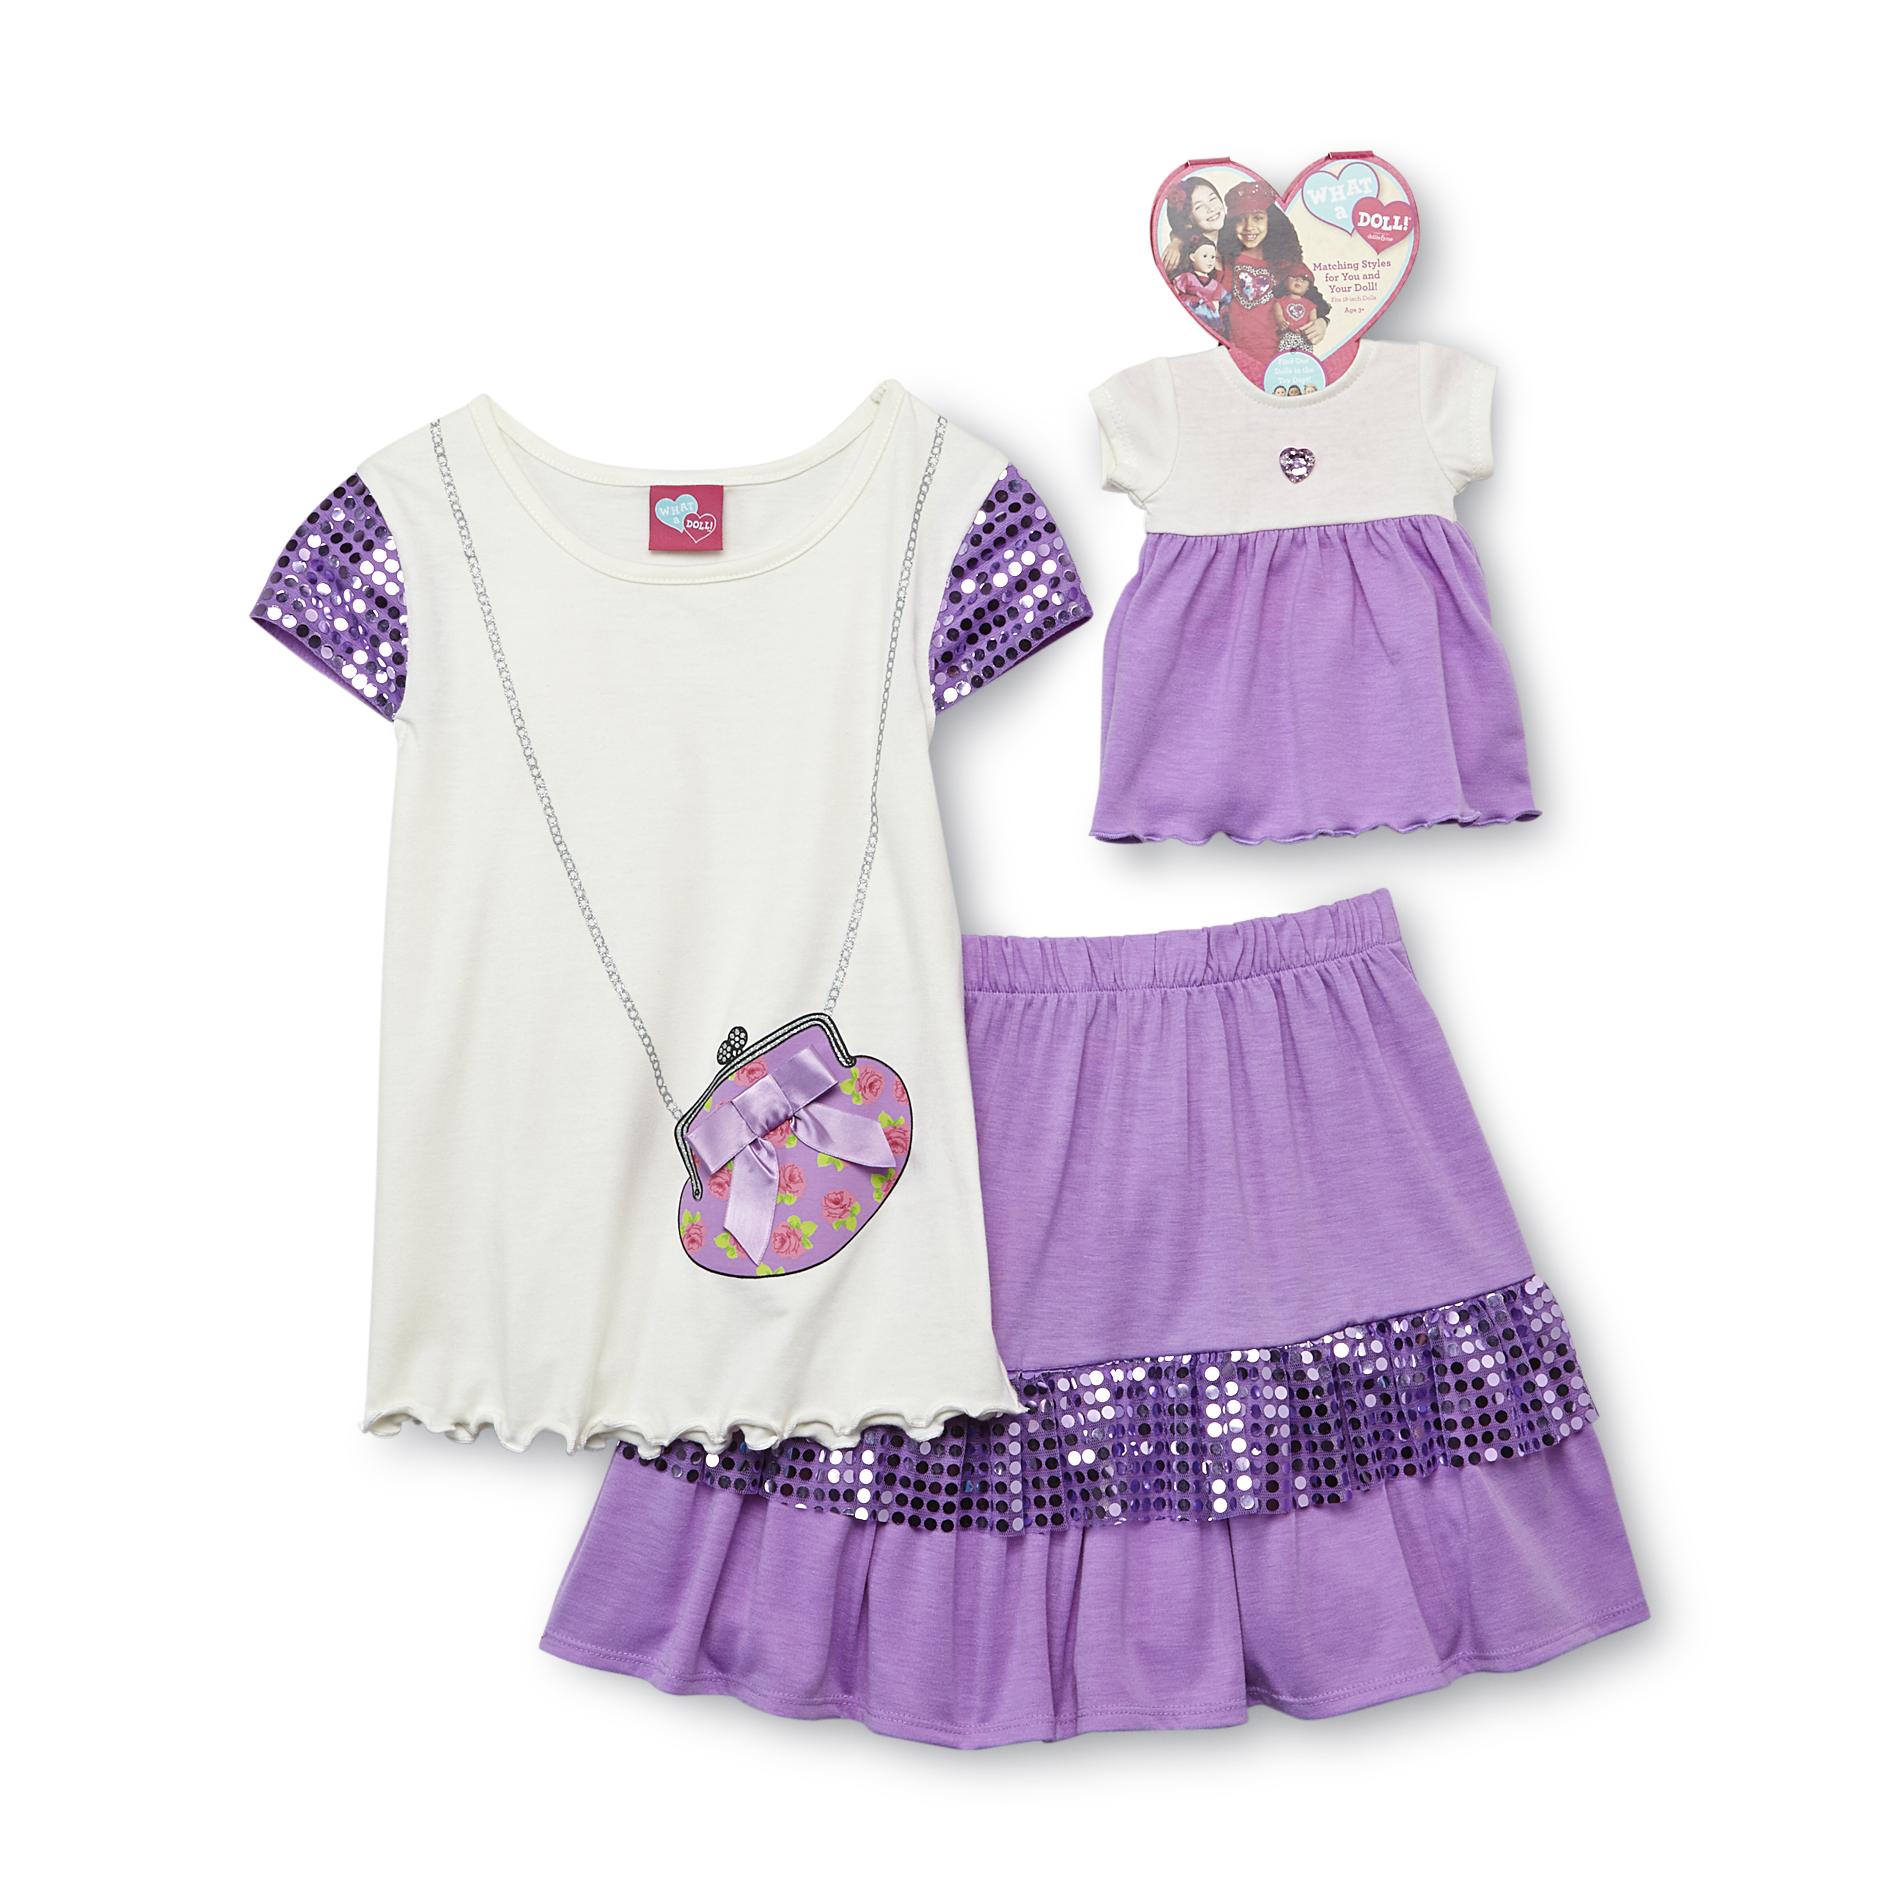 What A Doll Girl's Embellished Top  Skirt & Doll Dress - Purse